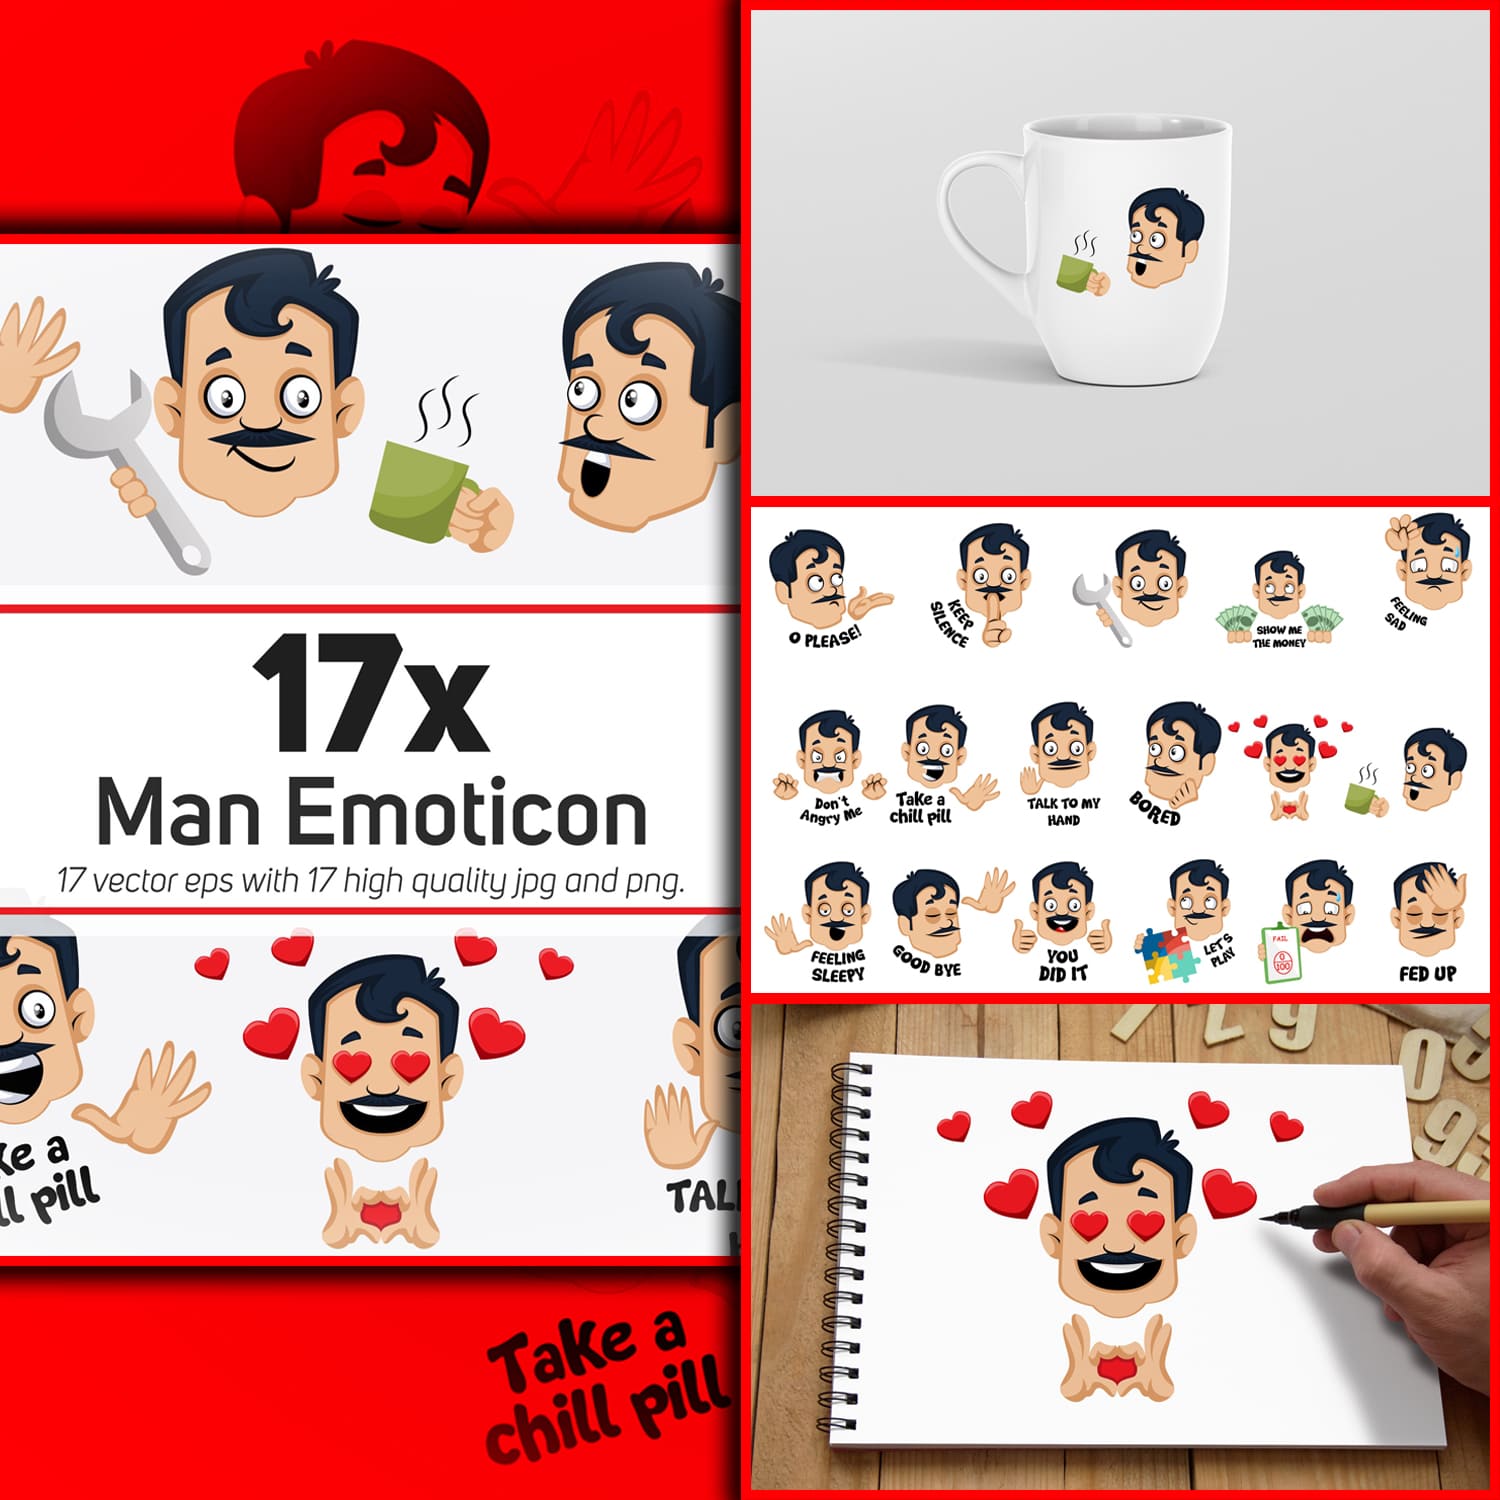 Preview man emoticon or stickers character collection.